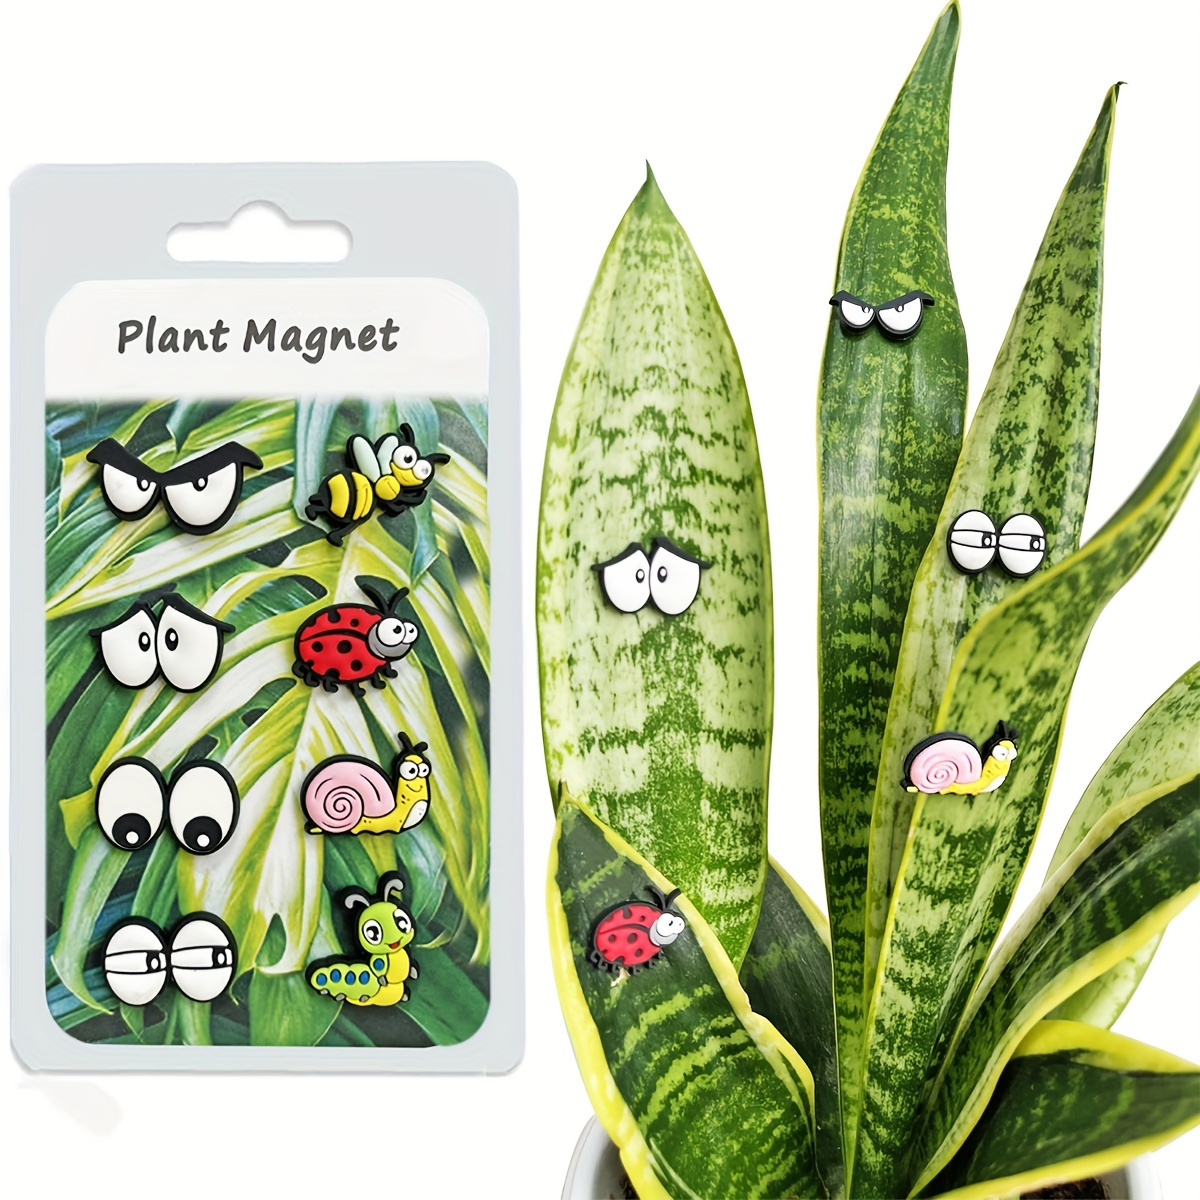 

8-piece Whimsical Plant Magnet Eyes Set - Perfect Gift For Women & Plant Enthusiasts, Unique Indoor Garden Accessories